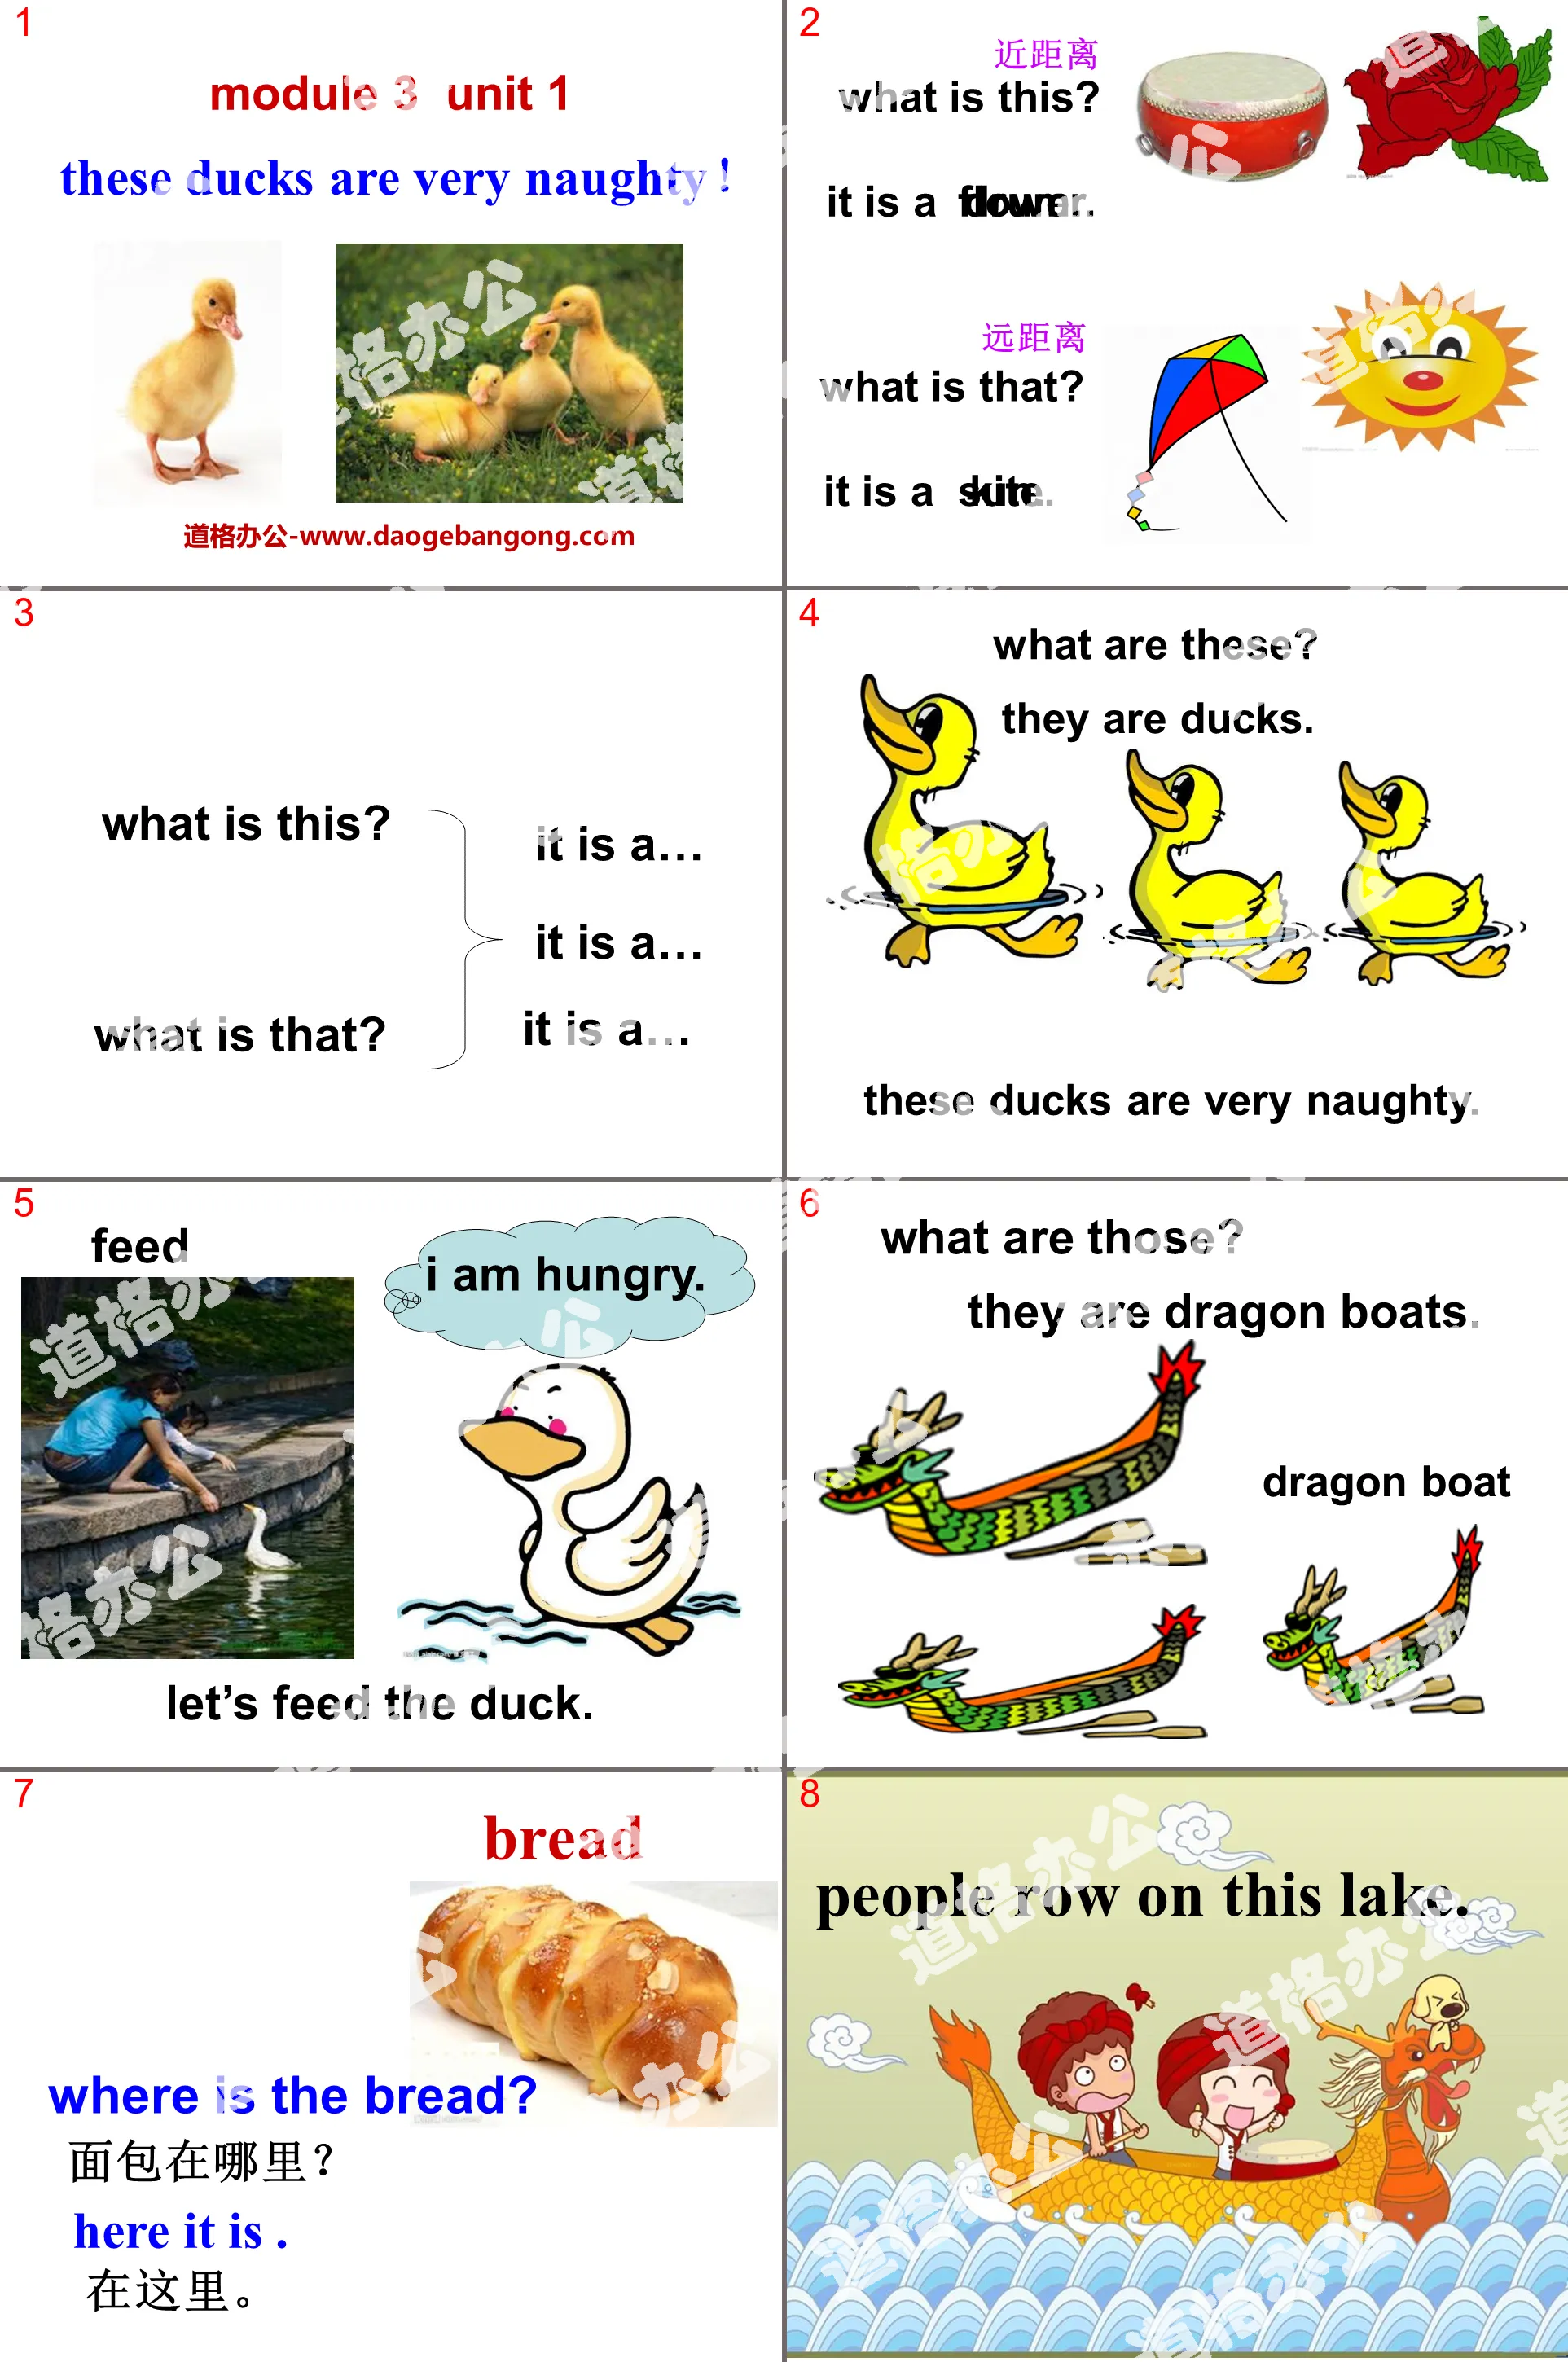 "These ducks are very naughty!" PPT courseware